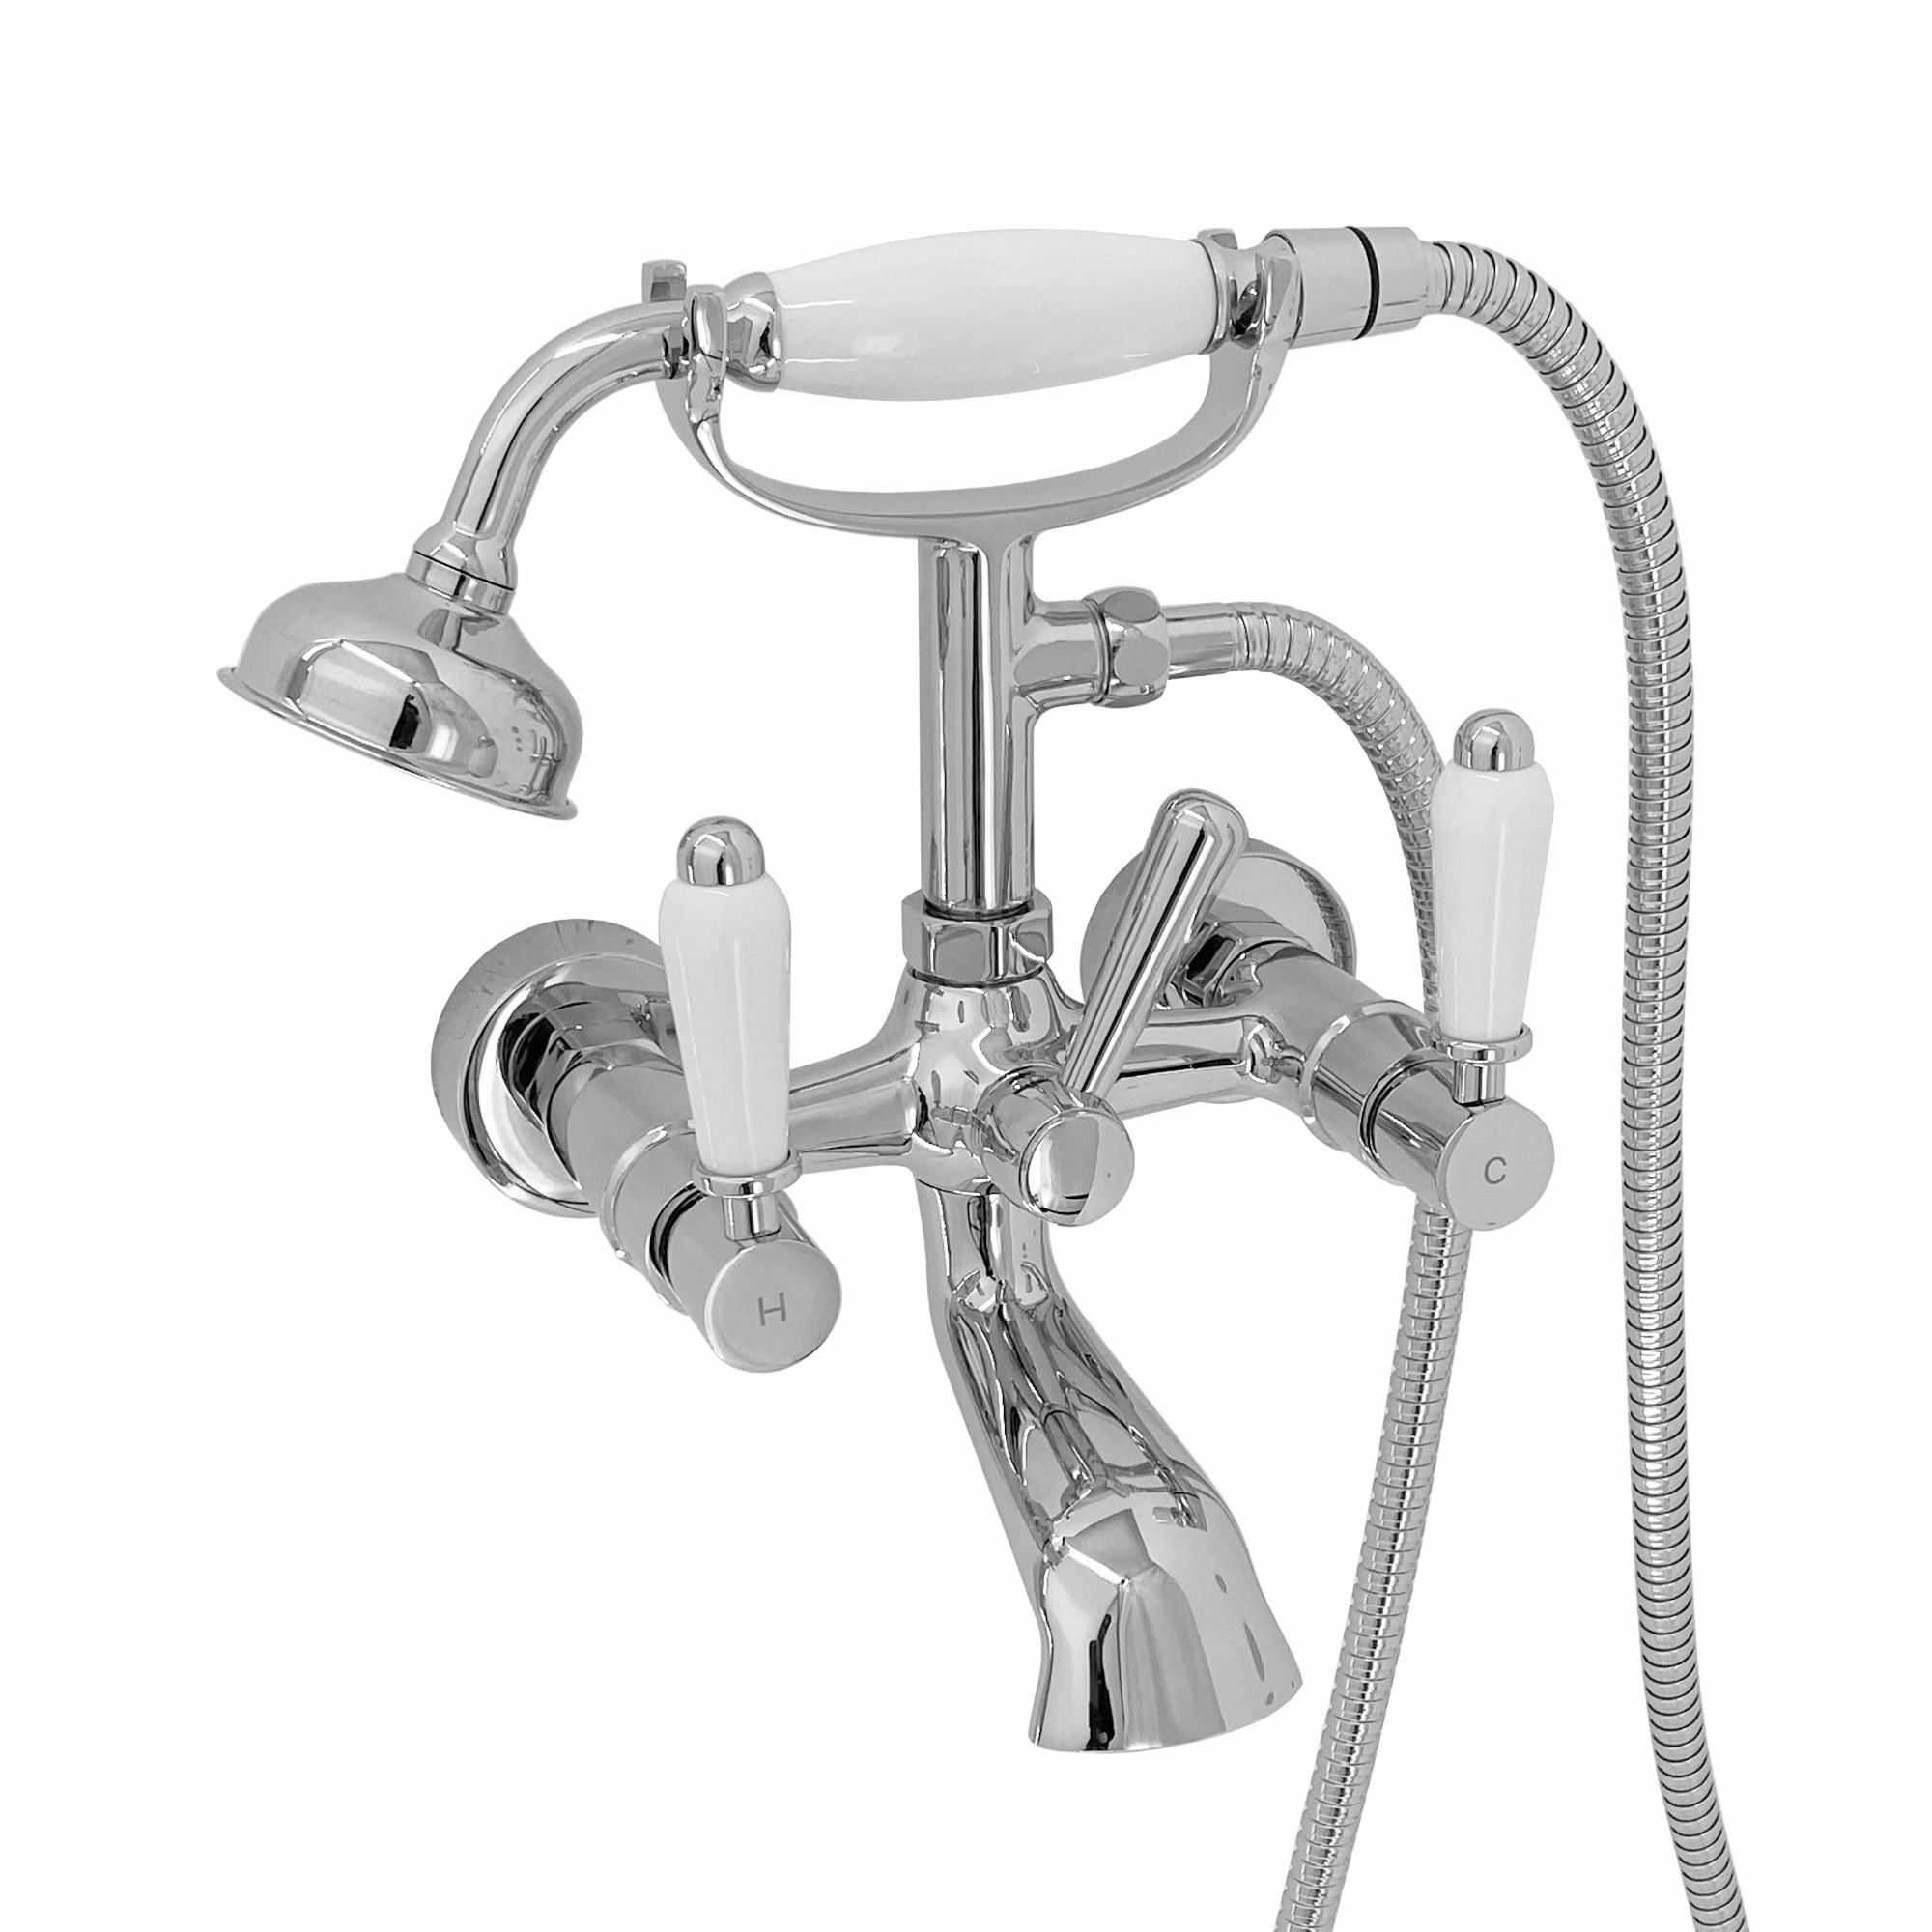 ENKI, Downton, BT0510 Wall Mounted Bath Shower Mixer Tap With Levers Chrome